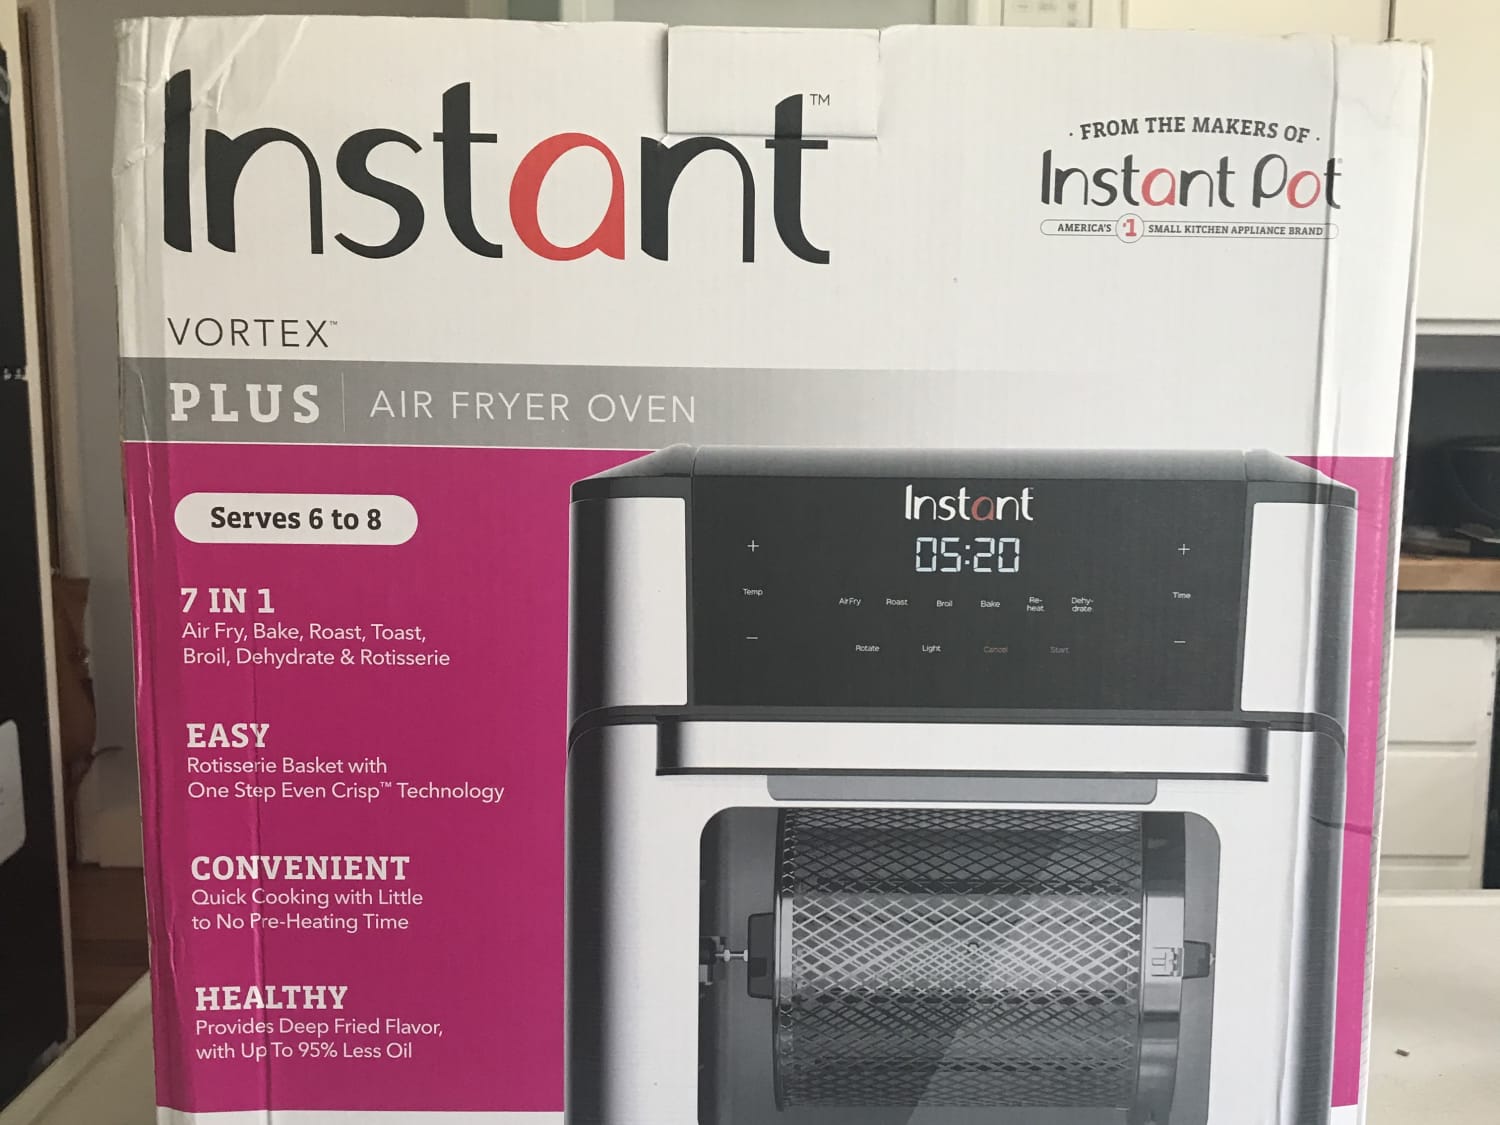 BUYING GUIDE: WHICH INSTANT BRANDS AIR FRYER OR INSTANT POT IS